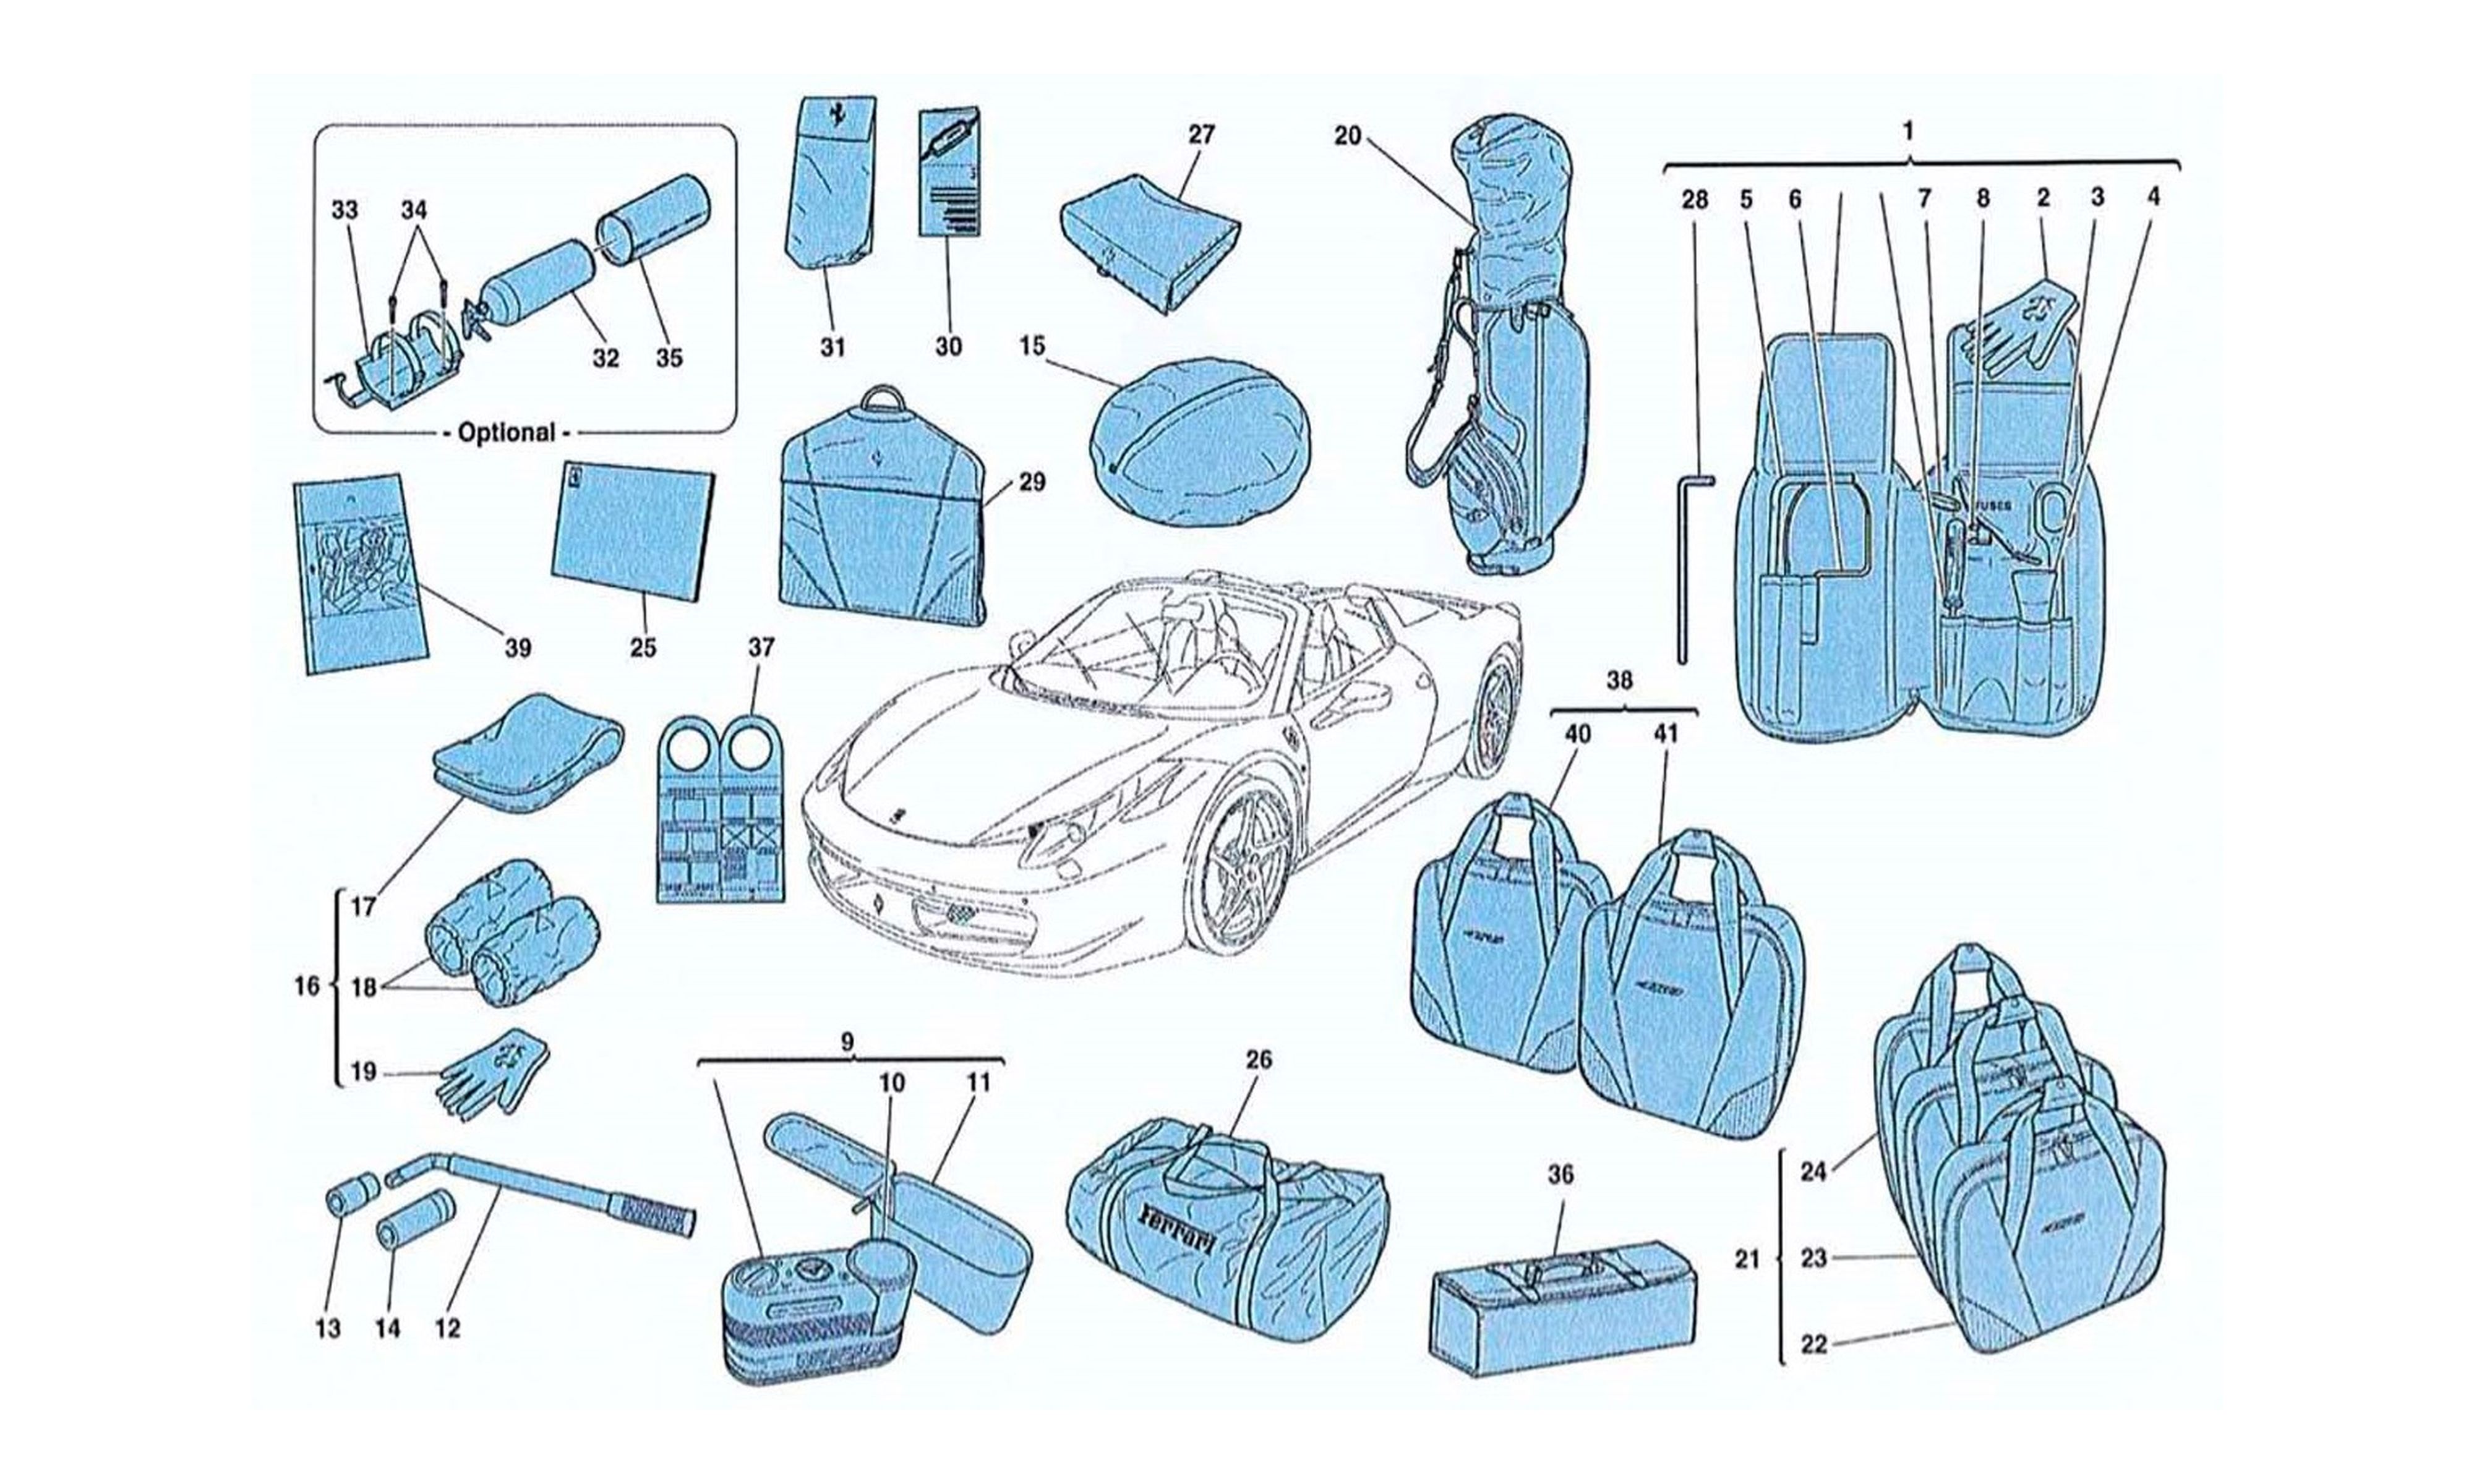 Schematic: Tools And Accessories Provided With Vehicle